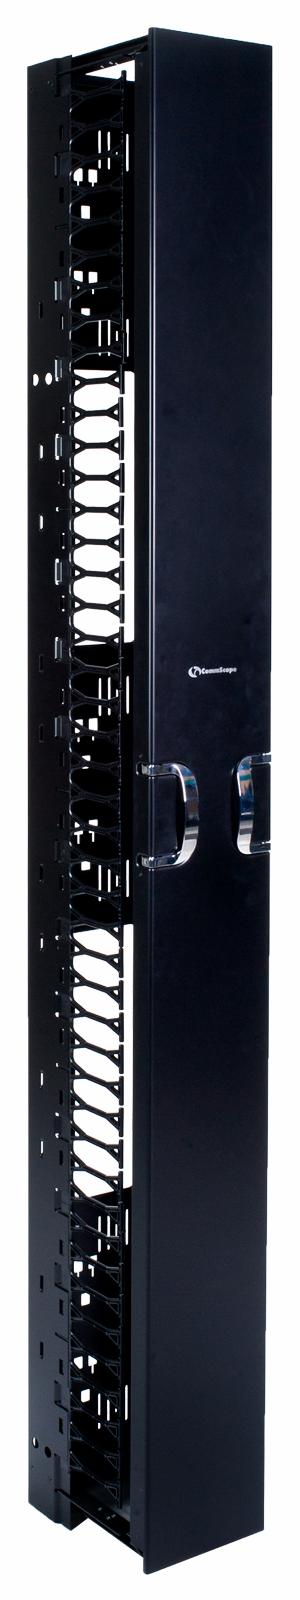 CommScope Vertical Cable Management Kit, 6in x 84in, (2134x152x298mm), Single Sided w. door hin ged both sides, Powder coated  black. Assembled